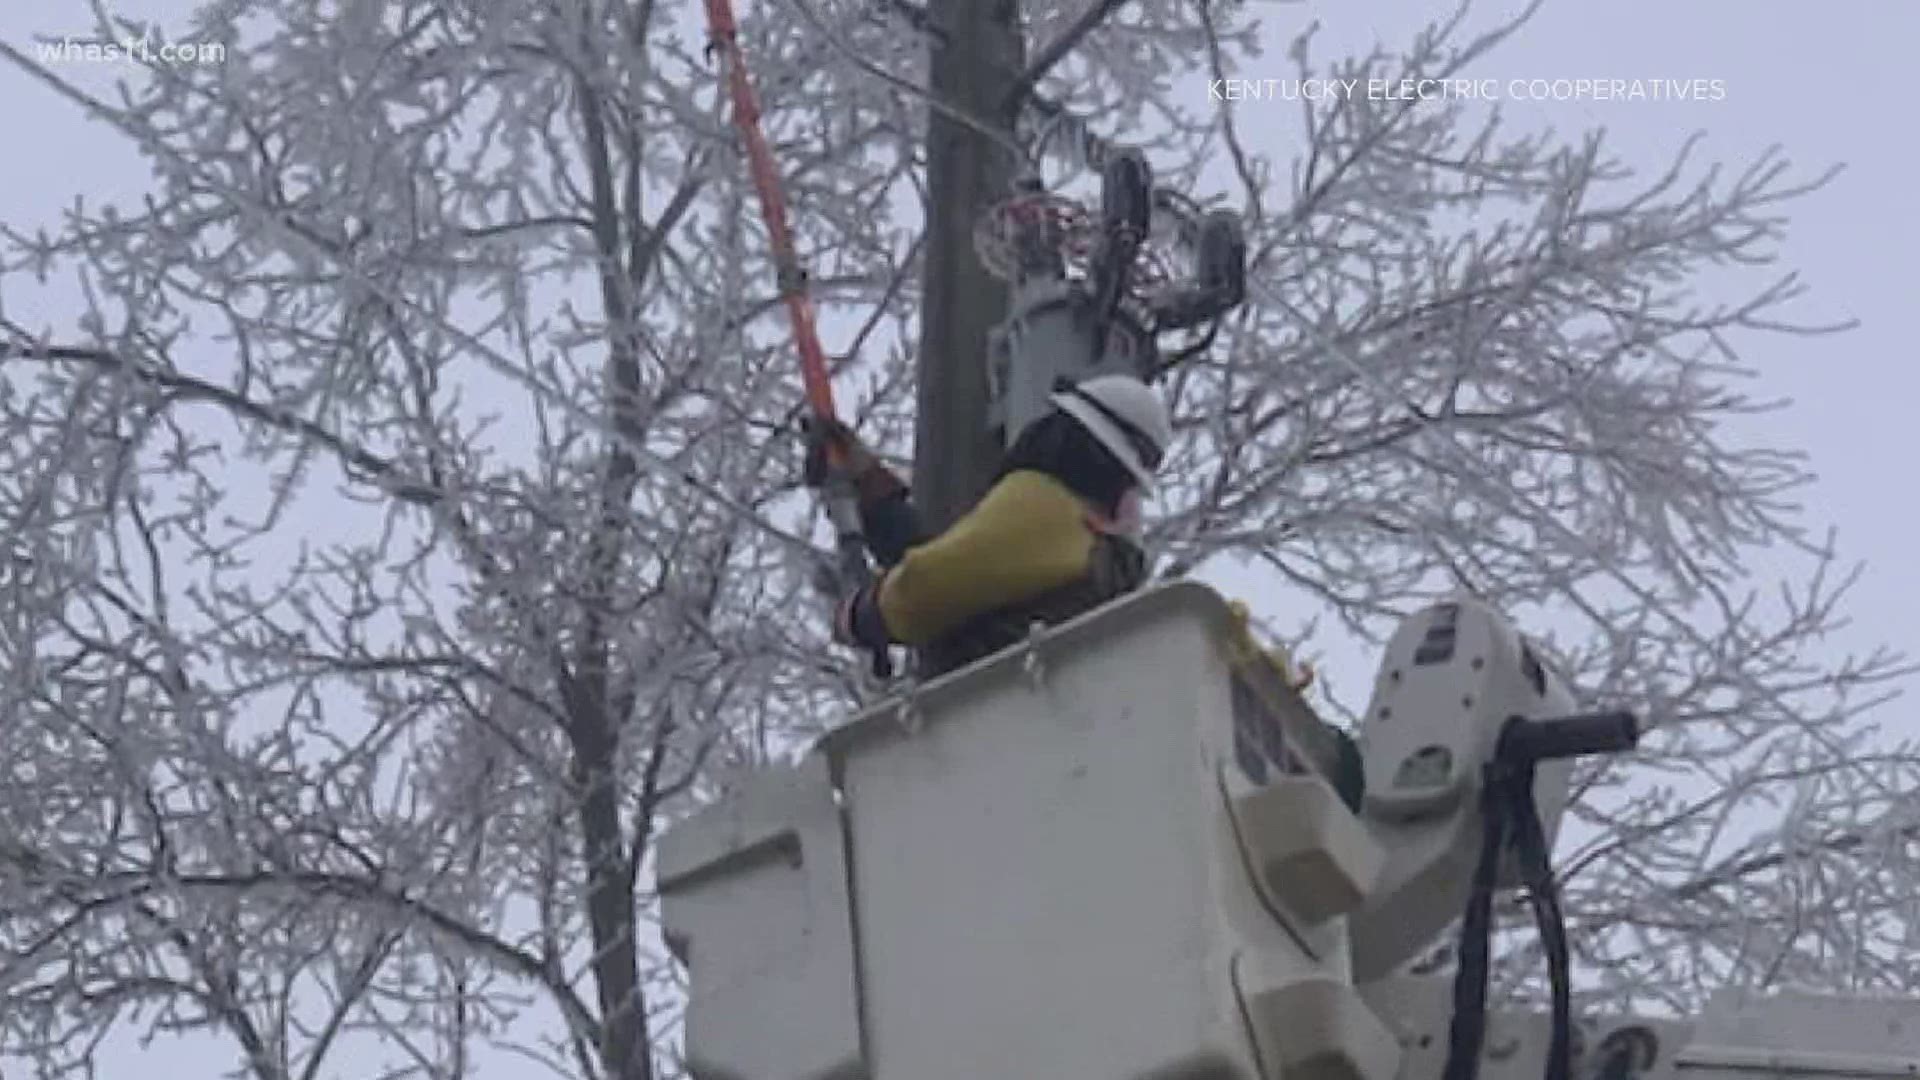 In Eastern Kentucky, thousands are still without power after recent winter weather.